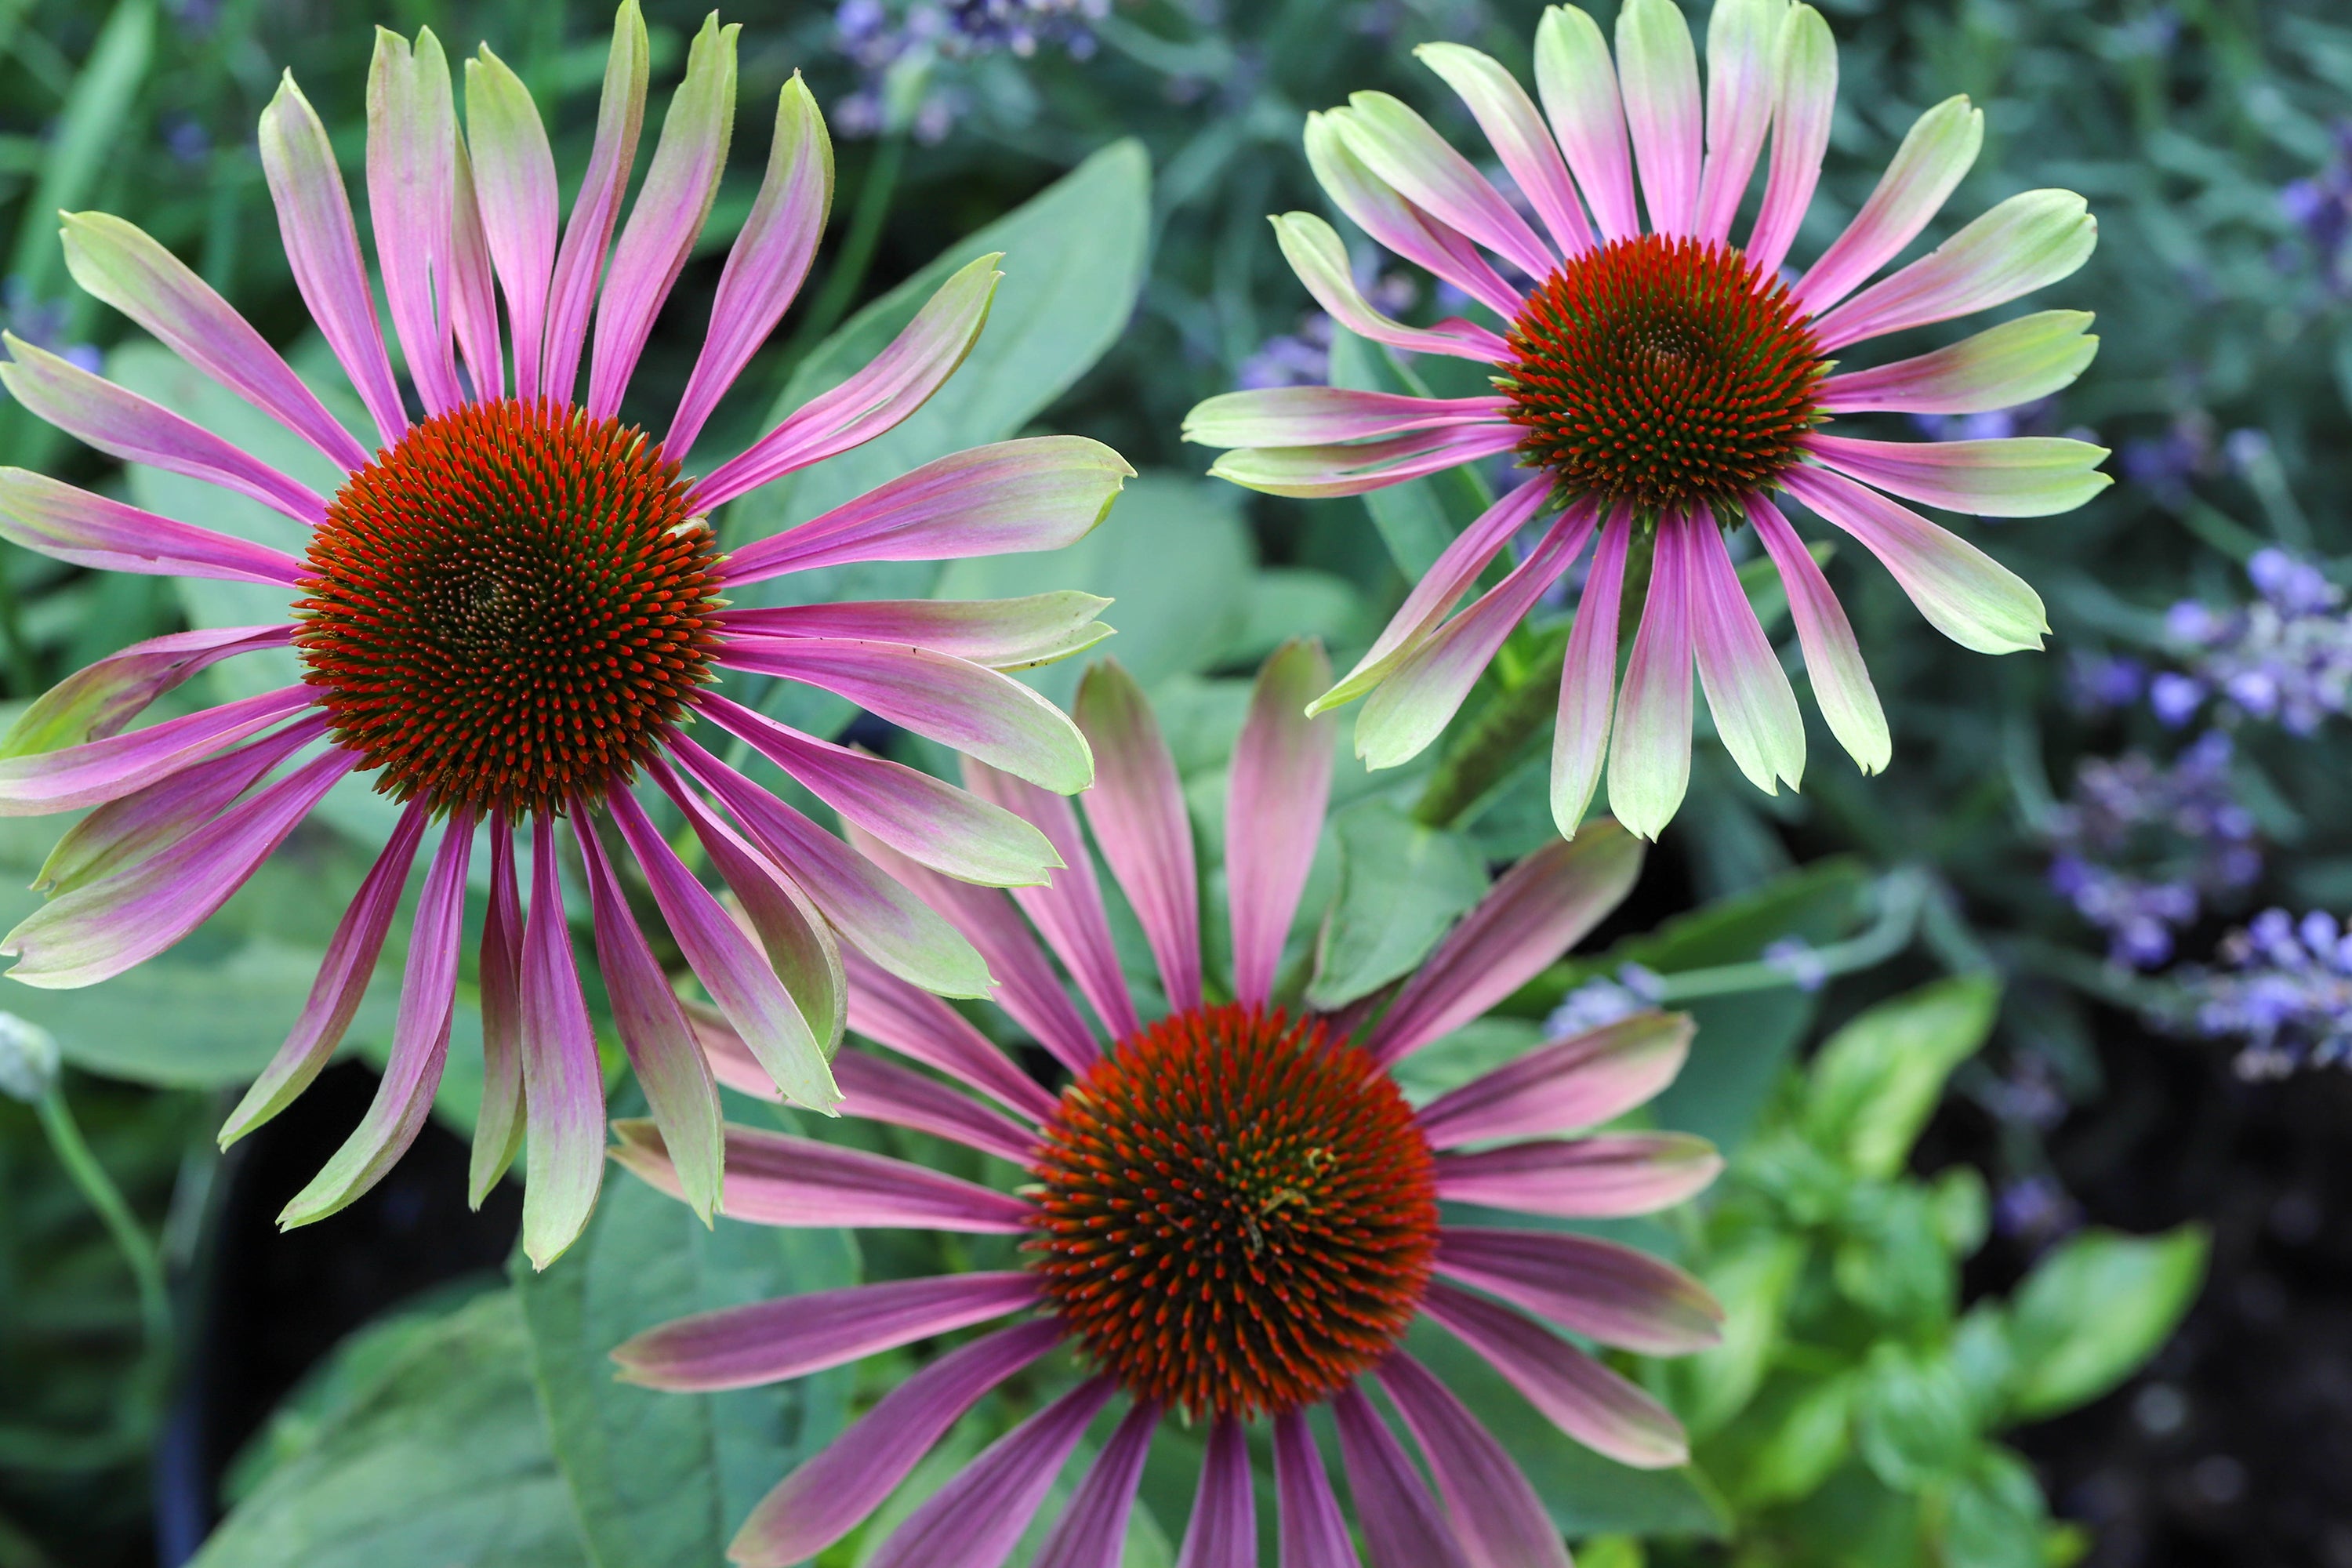 THE CRAZY, COLORFUL CONEFLOWER ‘GREEN TWISTER’